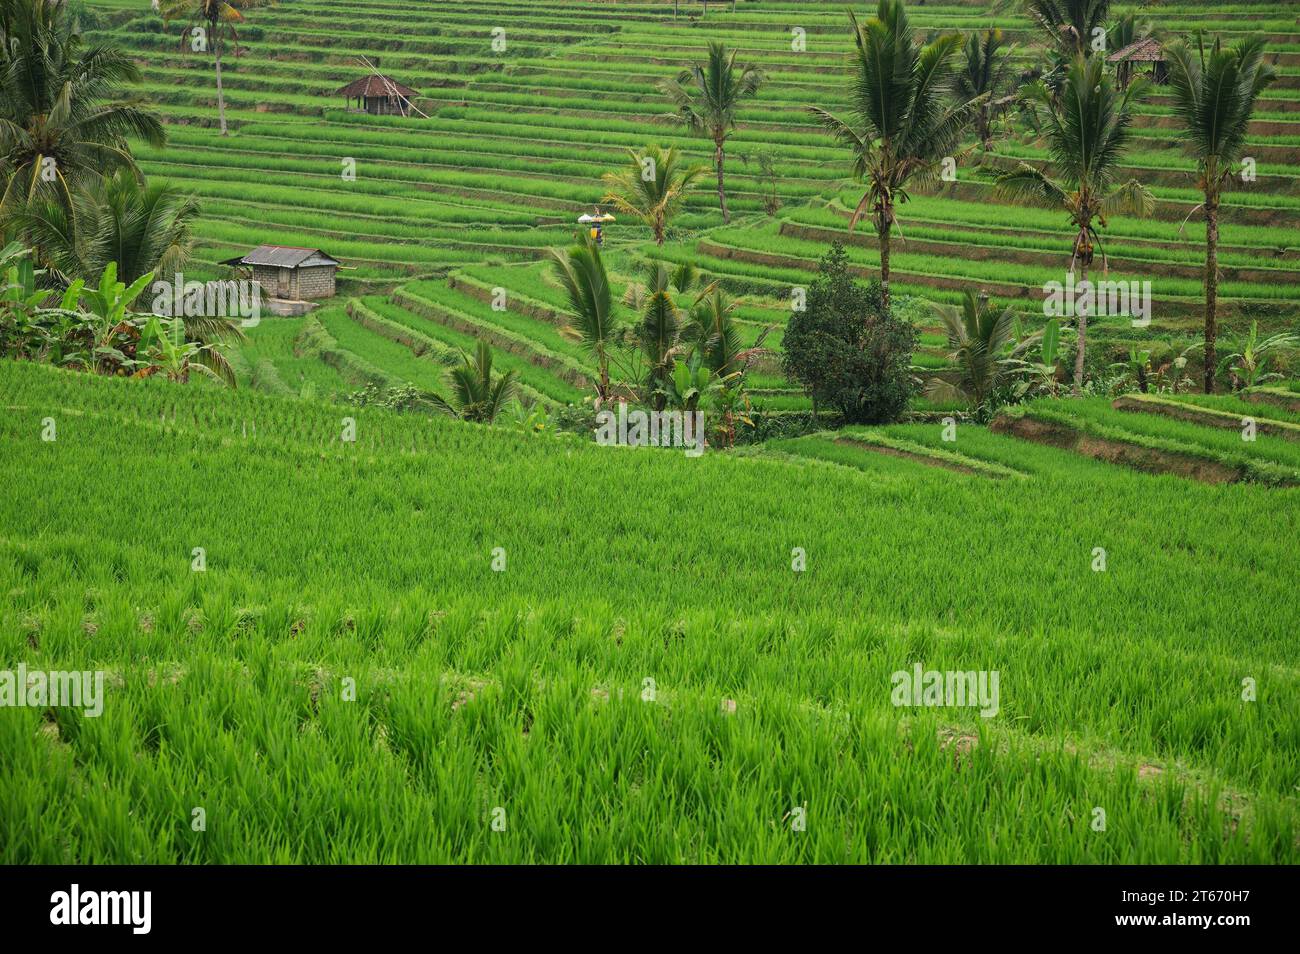 Scenic view of beautiful rice fields in Indonesia Stock Photo